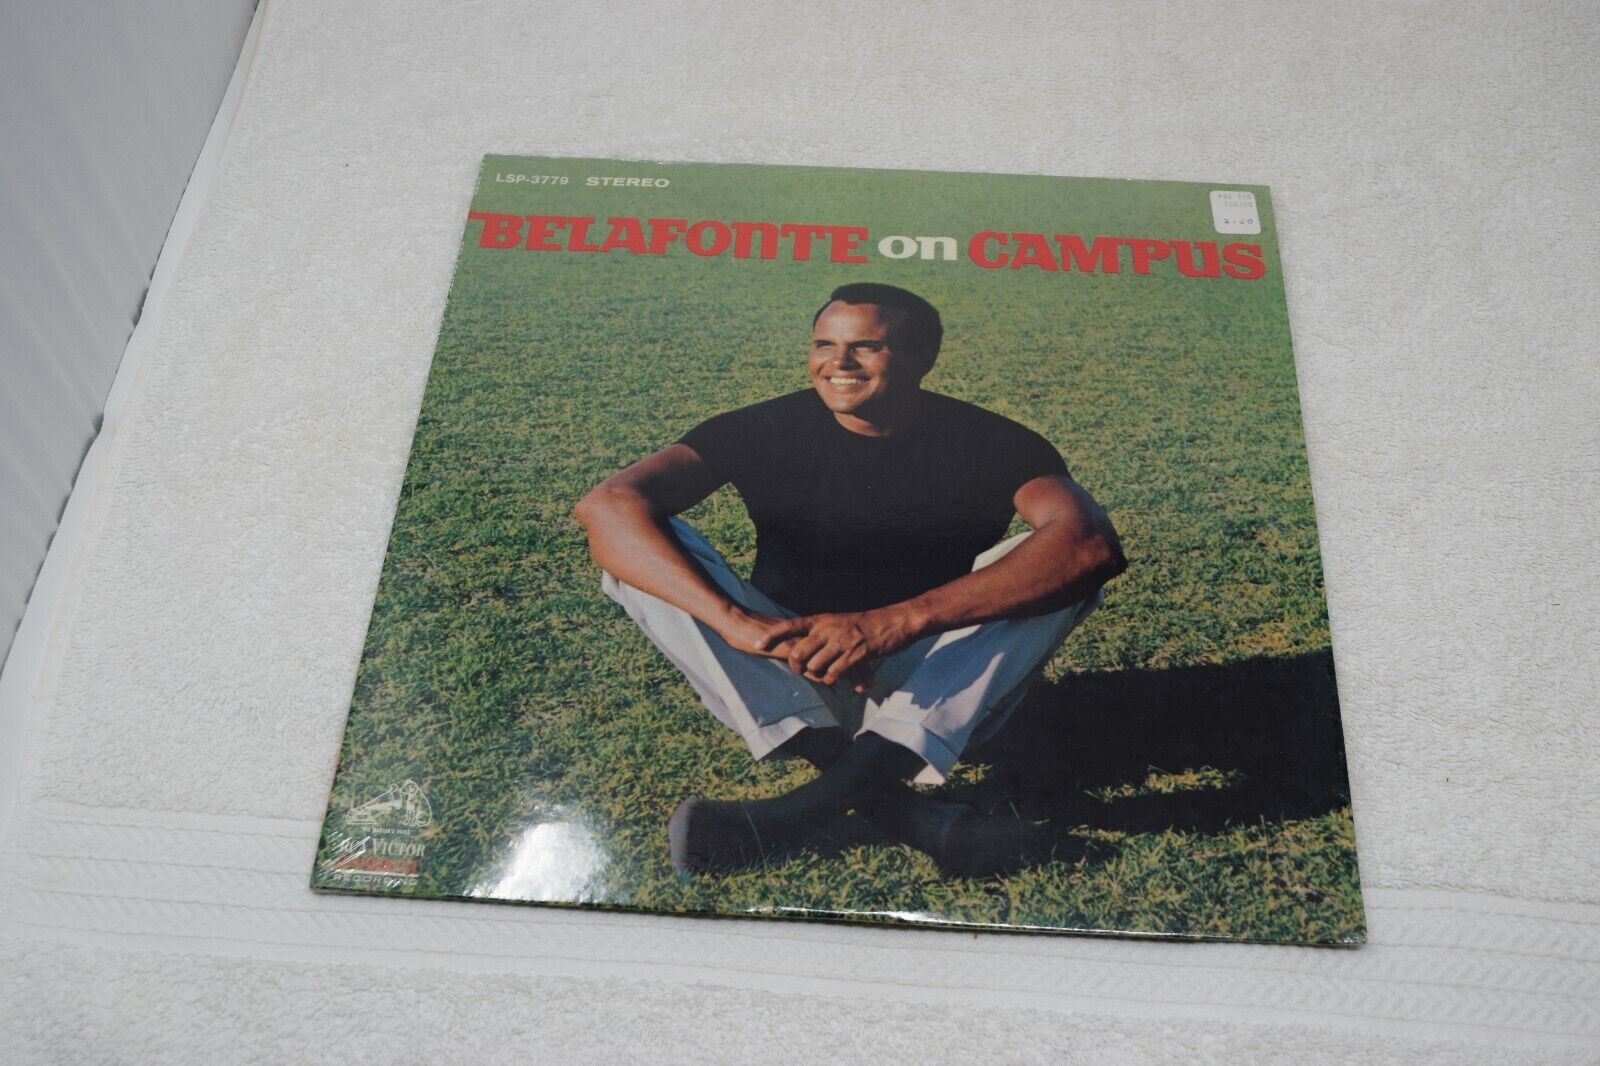 Belafonte On Campus, RCA Victor Dynagroove, LSP3779, Factory Sealed